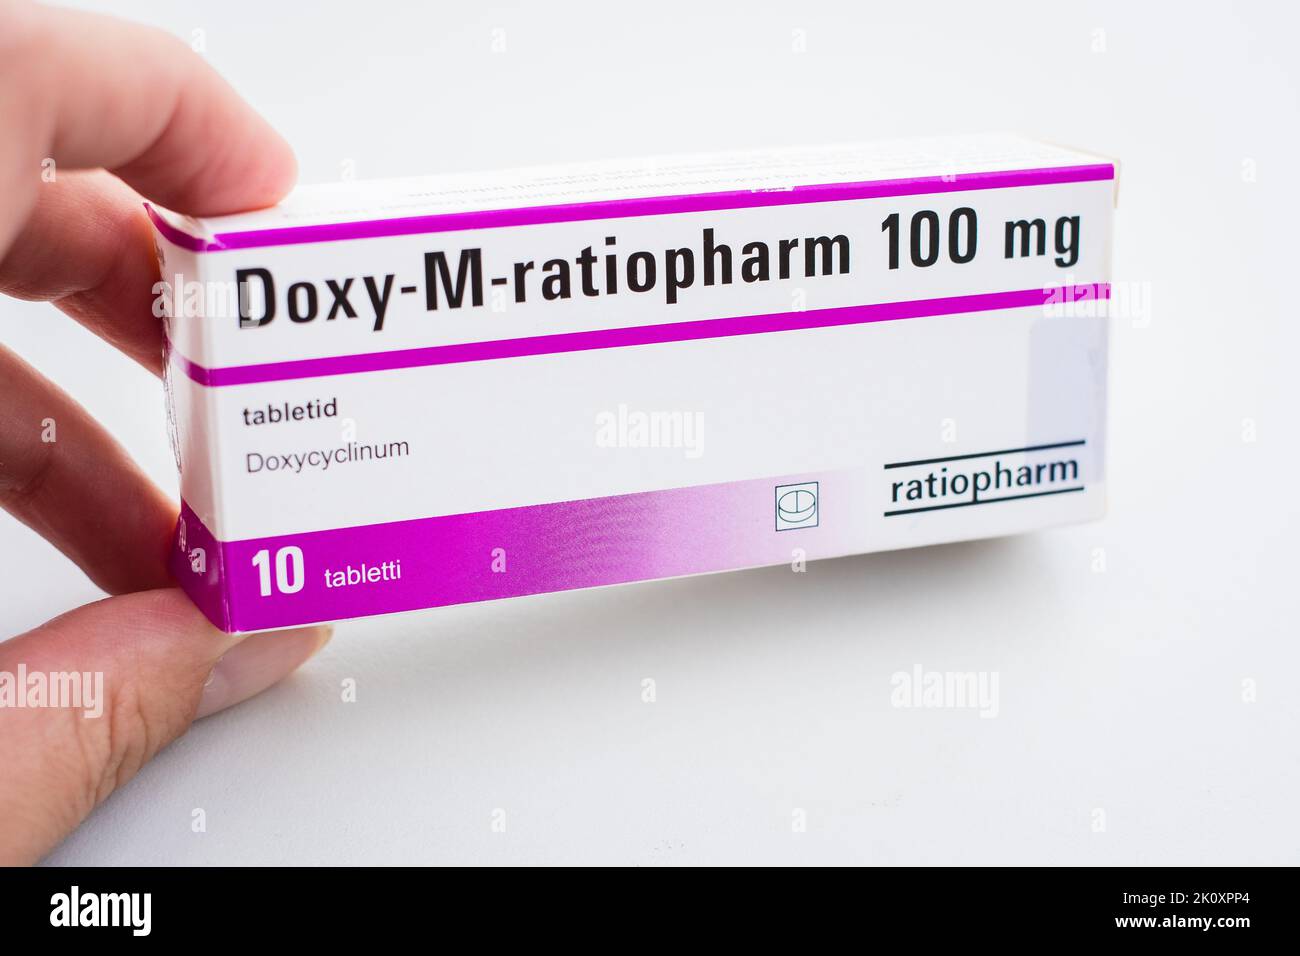 Woman taking Doxy-M-ratiopharm tablets by Ratiopharm for treating tick-borne borreliosis. Package of white pills. Pharmacy and medicine concept. Stock Photo